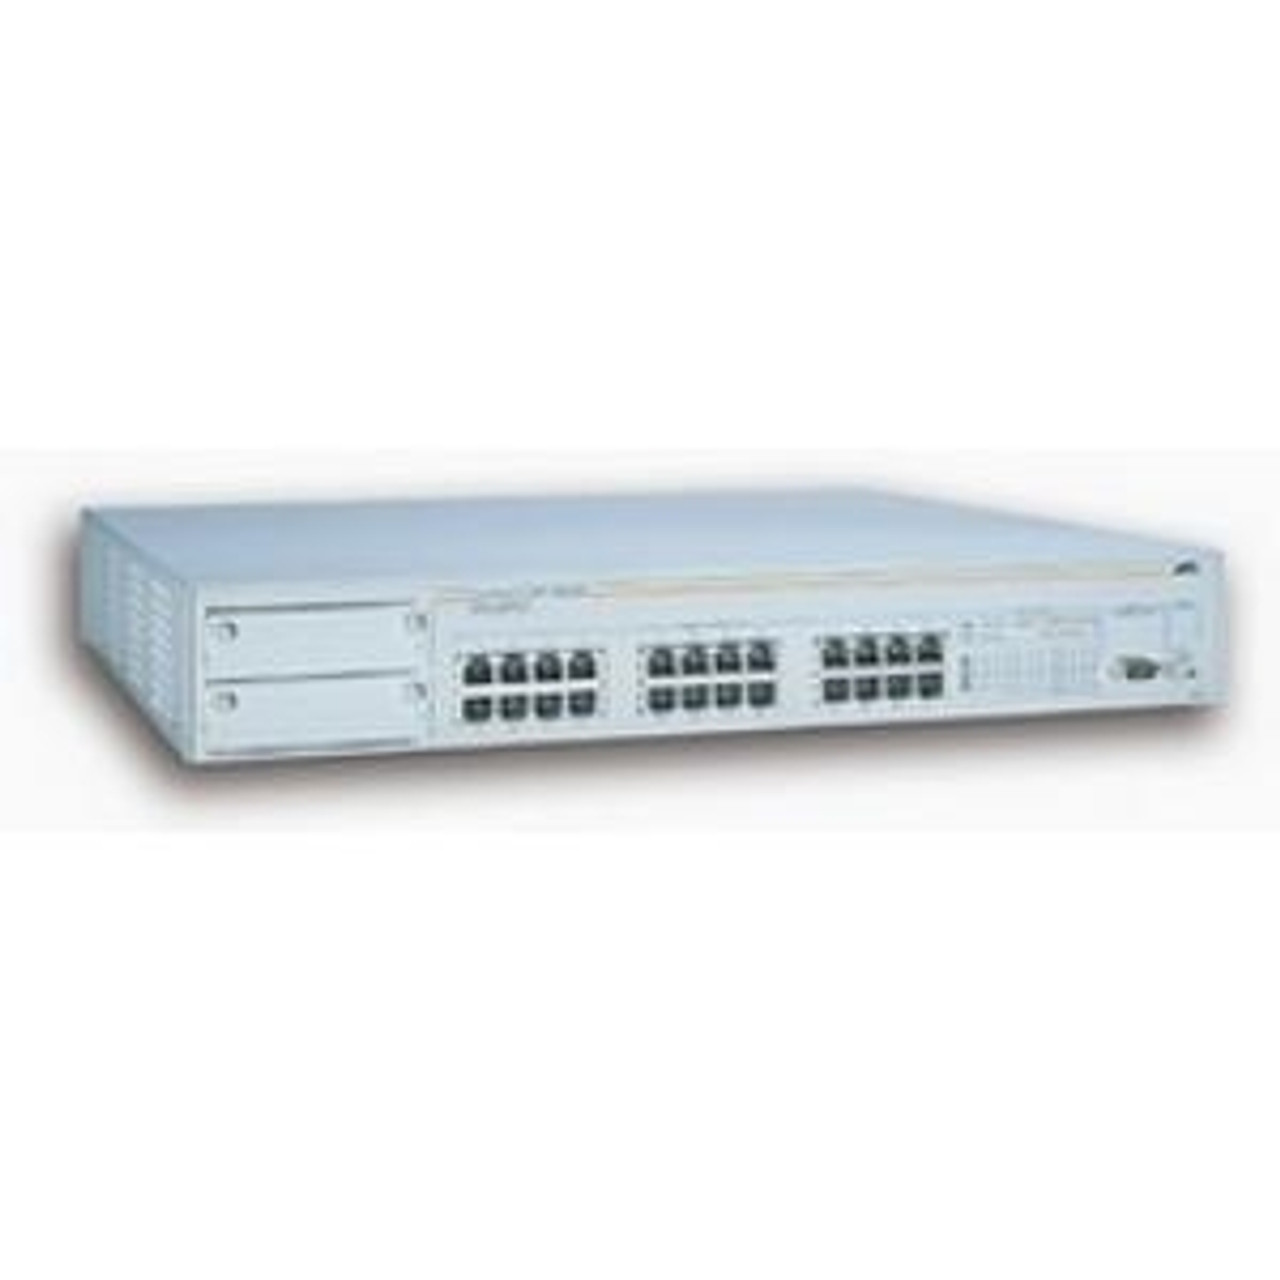 AT-8324-50 Allied Telesis AT-8324 Managed Stackable Ethernet Switch (Refurbished)